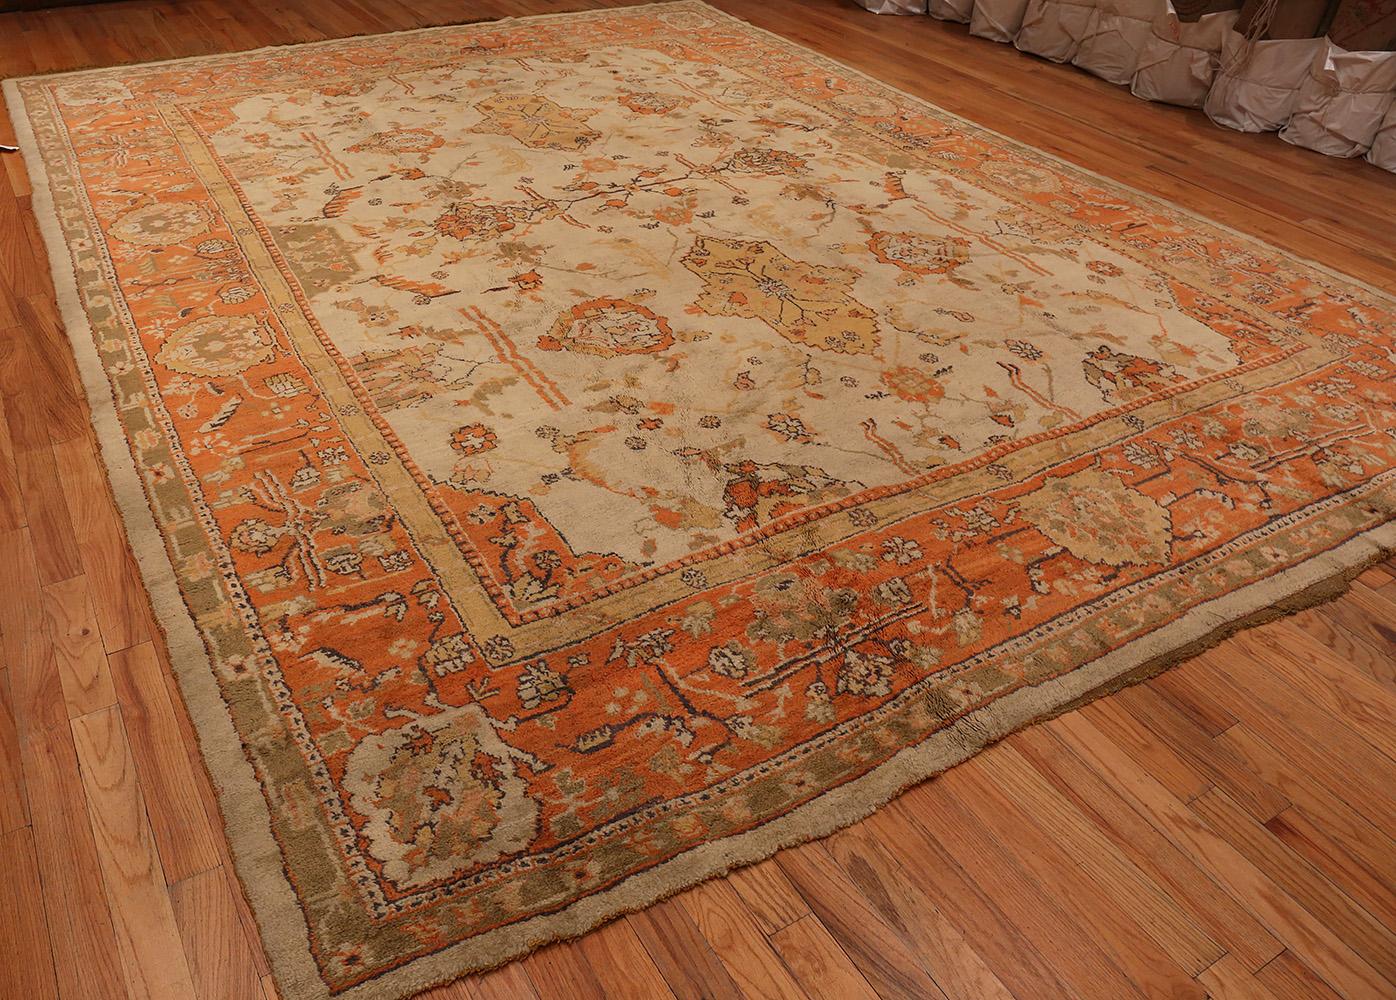 Decorative Antique Ivory Background Turkish Oushak Oriental Rug, Country of Origin / Rug Type: Turkish Rugs, Circa Date: 1900. Size: 12 ft x 15 ft (3.66 m x 4.57 m).